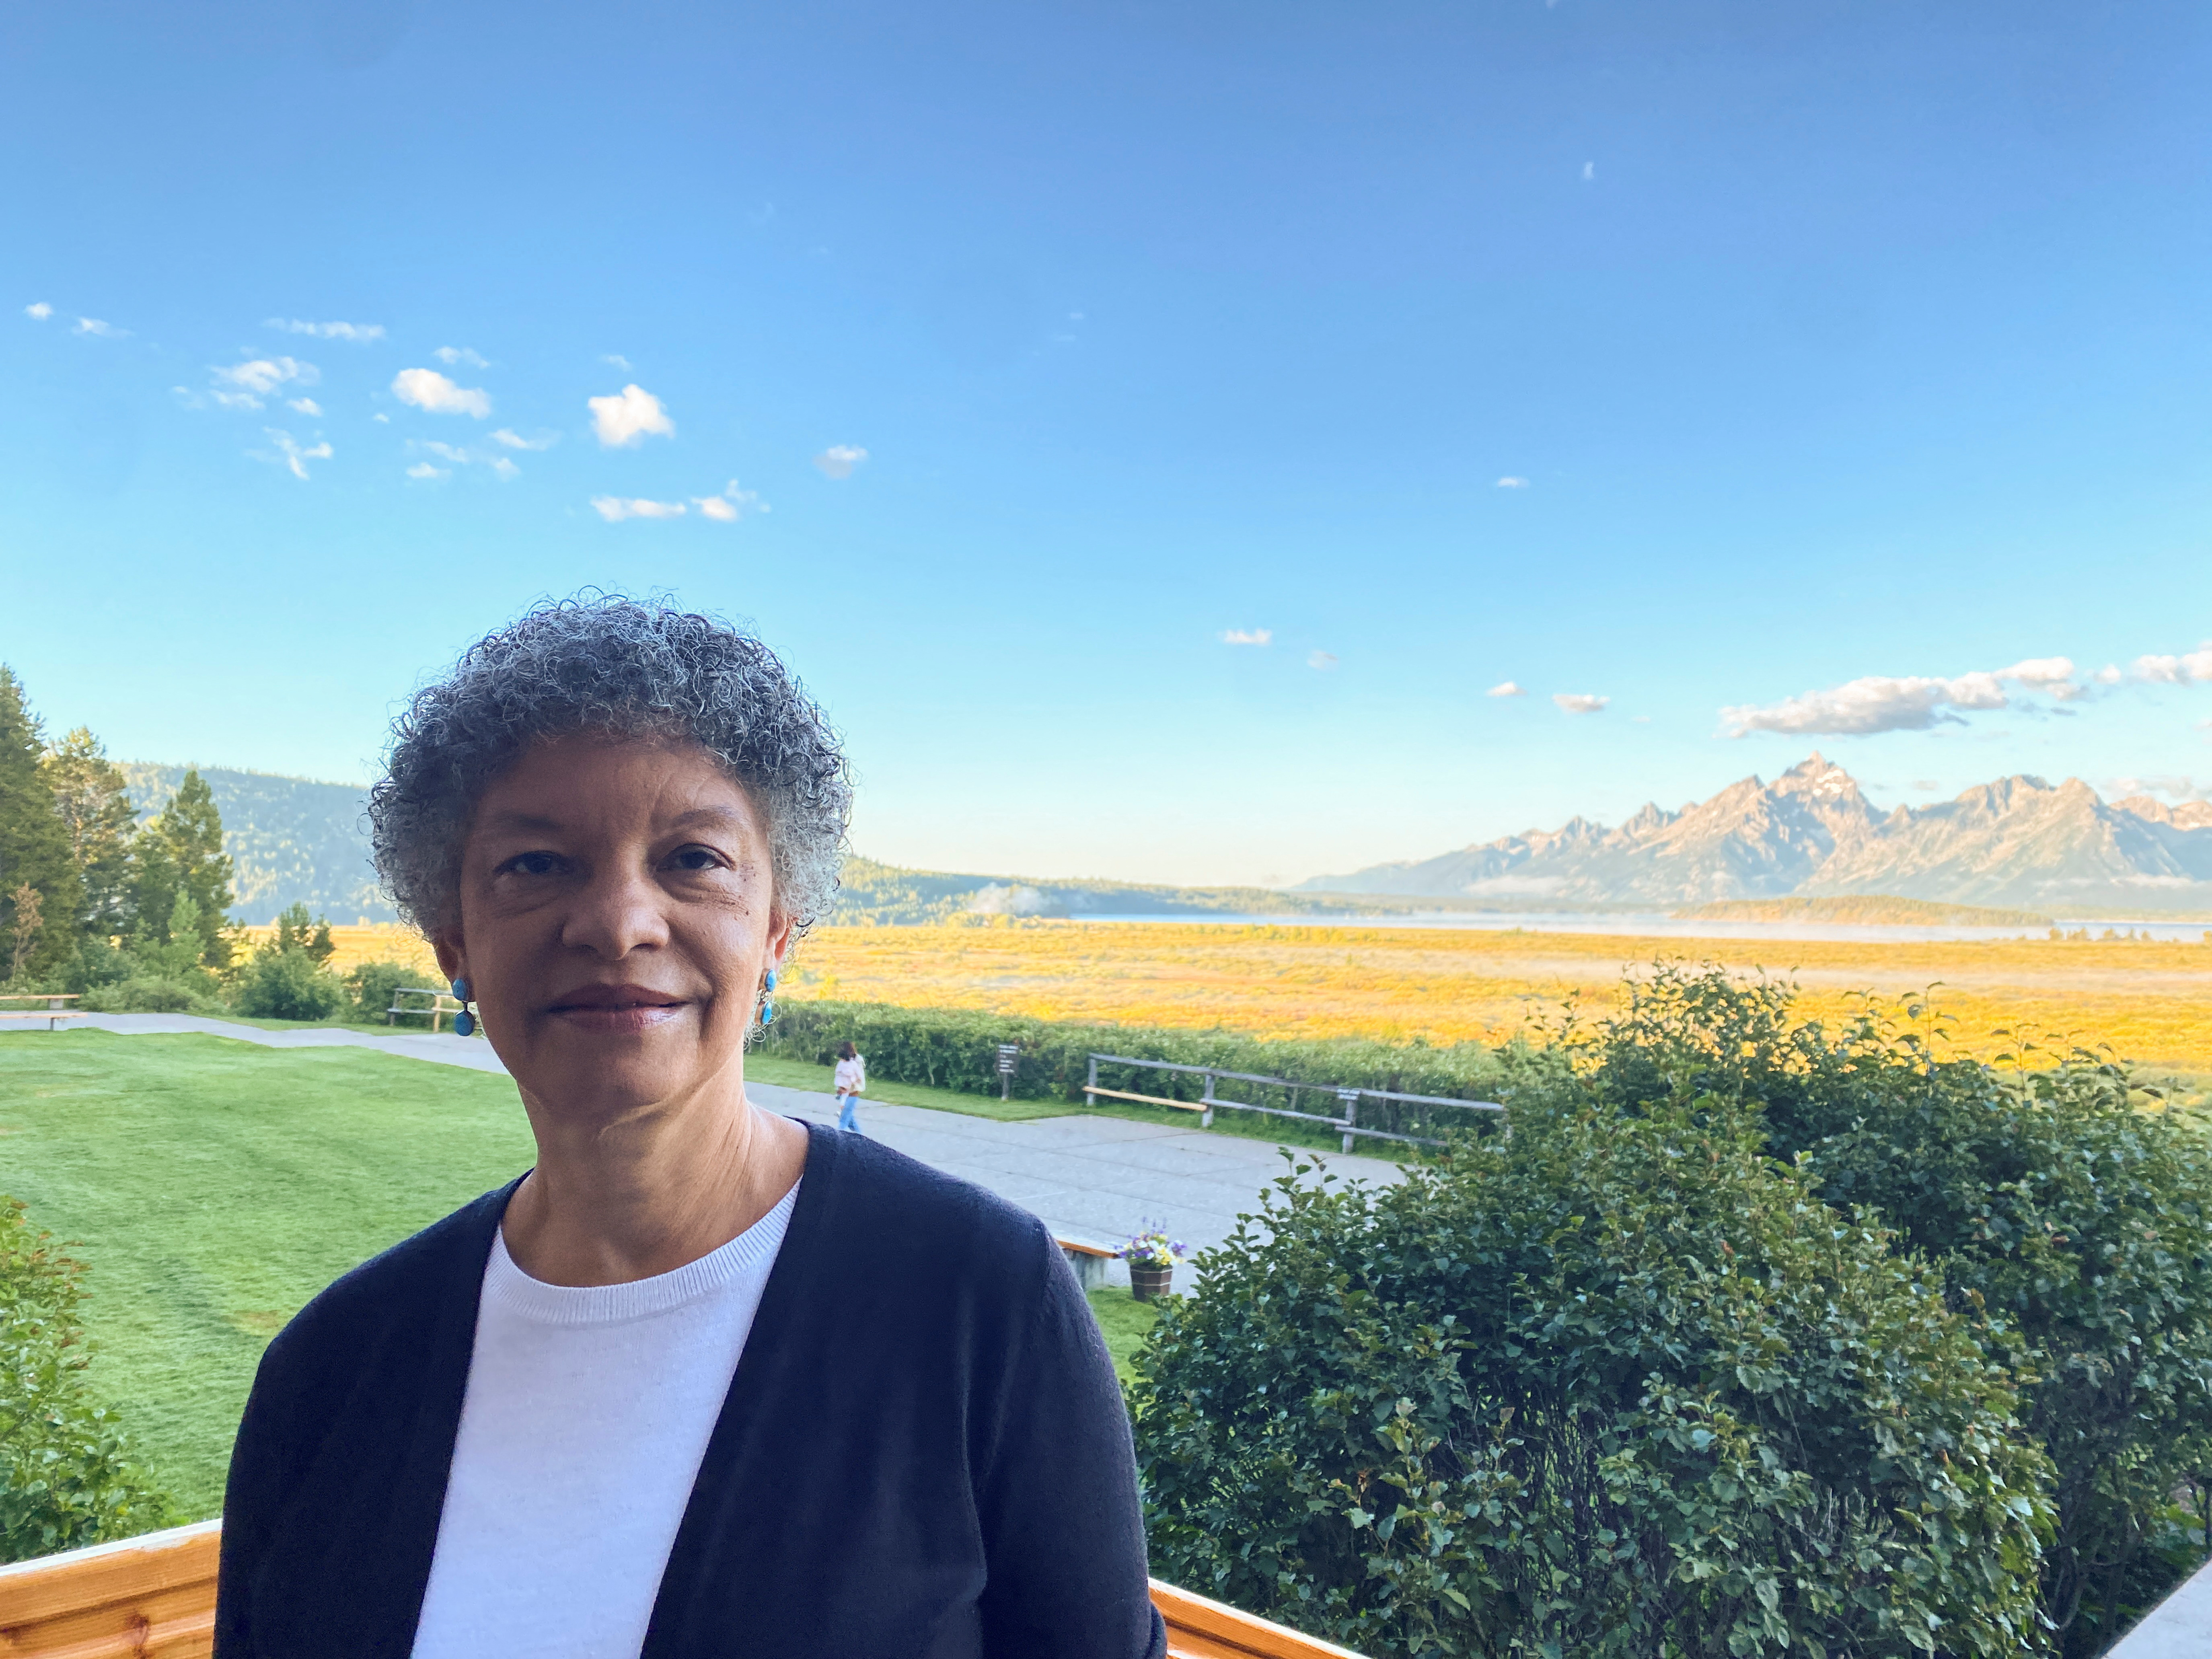 Federal Reserve Bank of Boston President Susan Collins poses for a picture in Jackson Hole, Wyoming